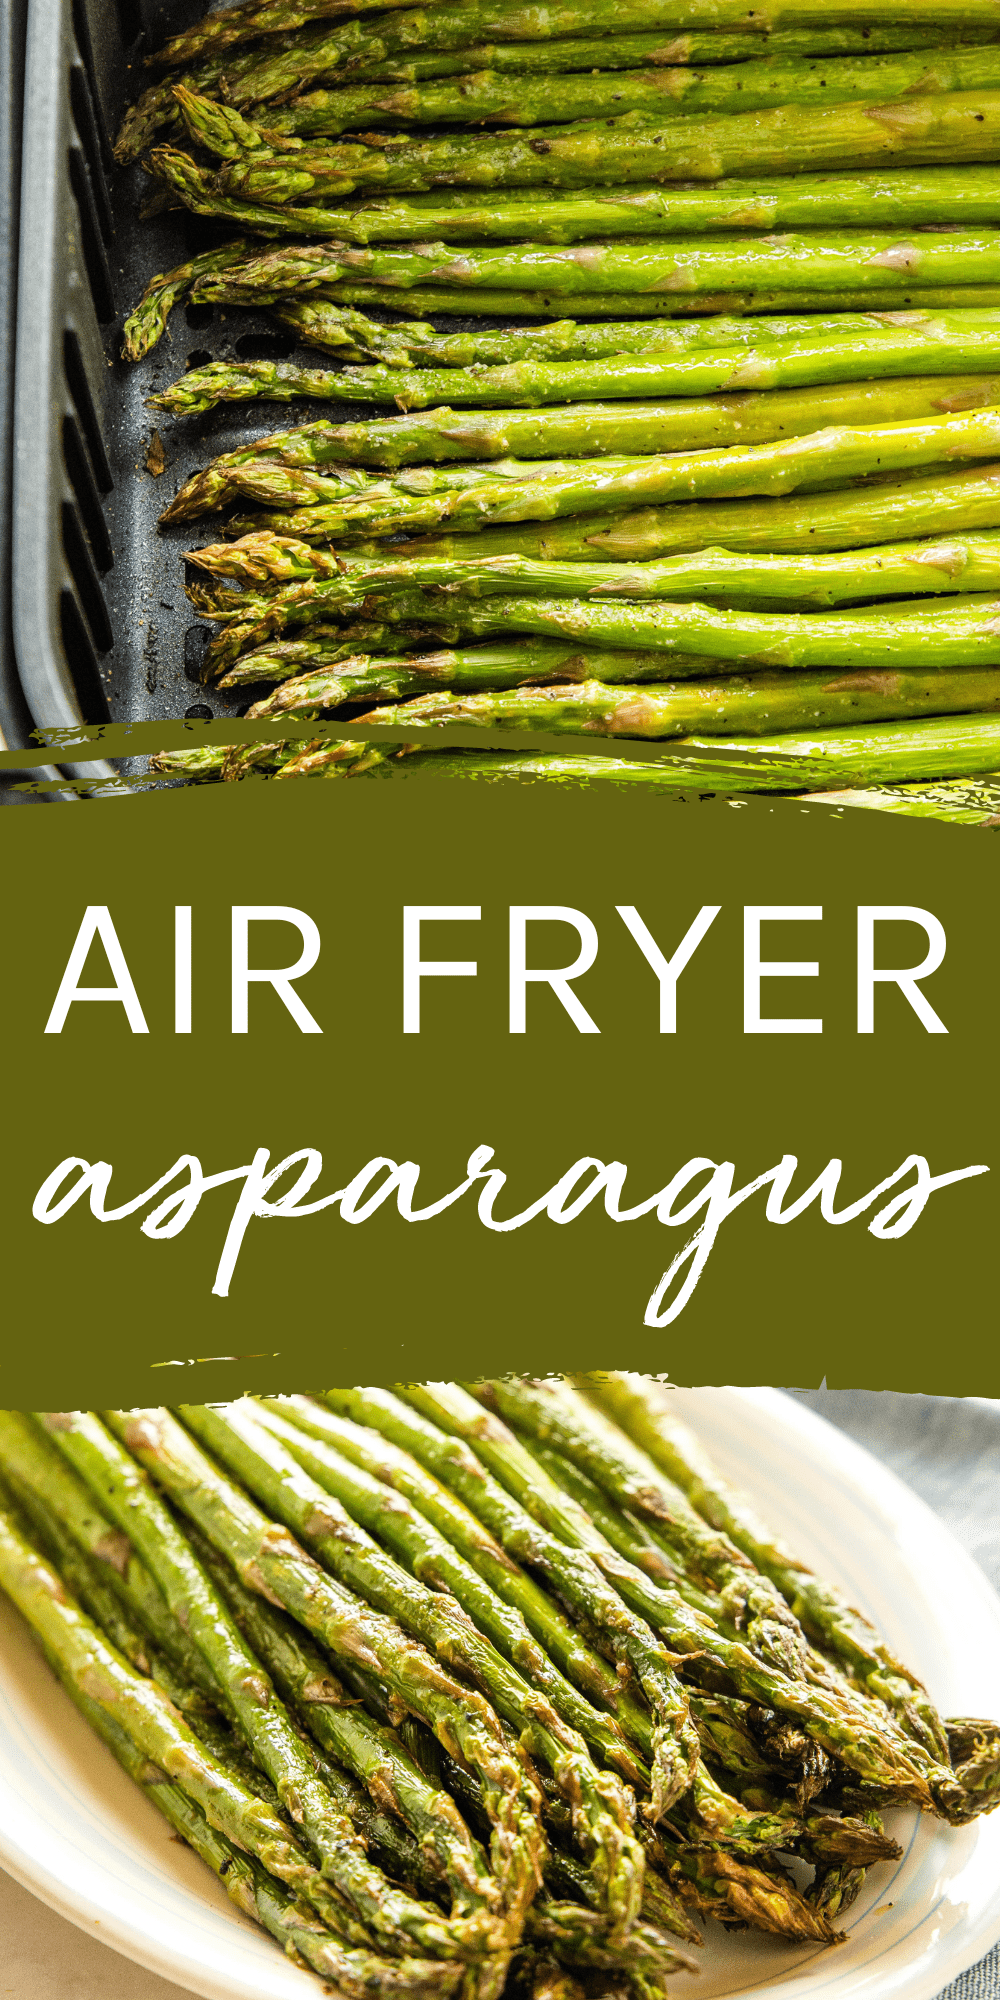 This Air Fryer Asparagus recipe is a healthy side dish that's ready in 5-6 minutes! Perfectly tender & flavoured with lemon and garlic. Recipe from thebusybaker.ca! #airfryerasparagus #asparagusinairfryer #asparagus #easysidedish #holidaysidedish #vegetables #veggies #plantbased #sidedish via @busybakerblog